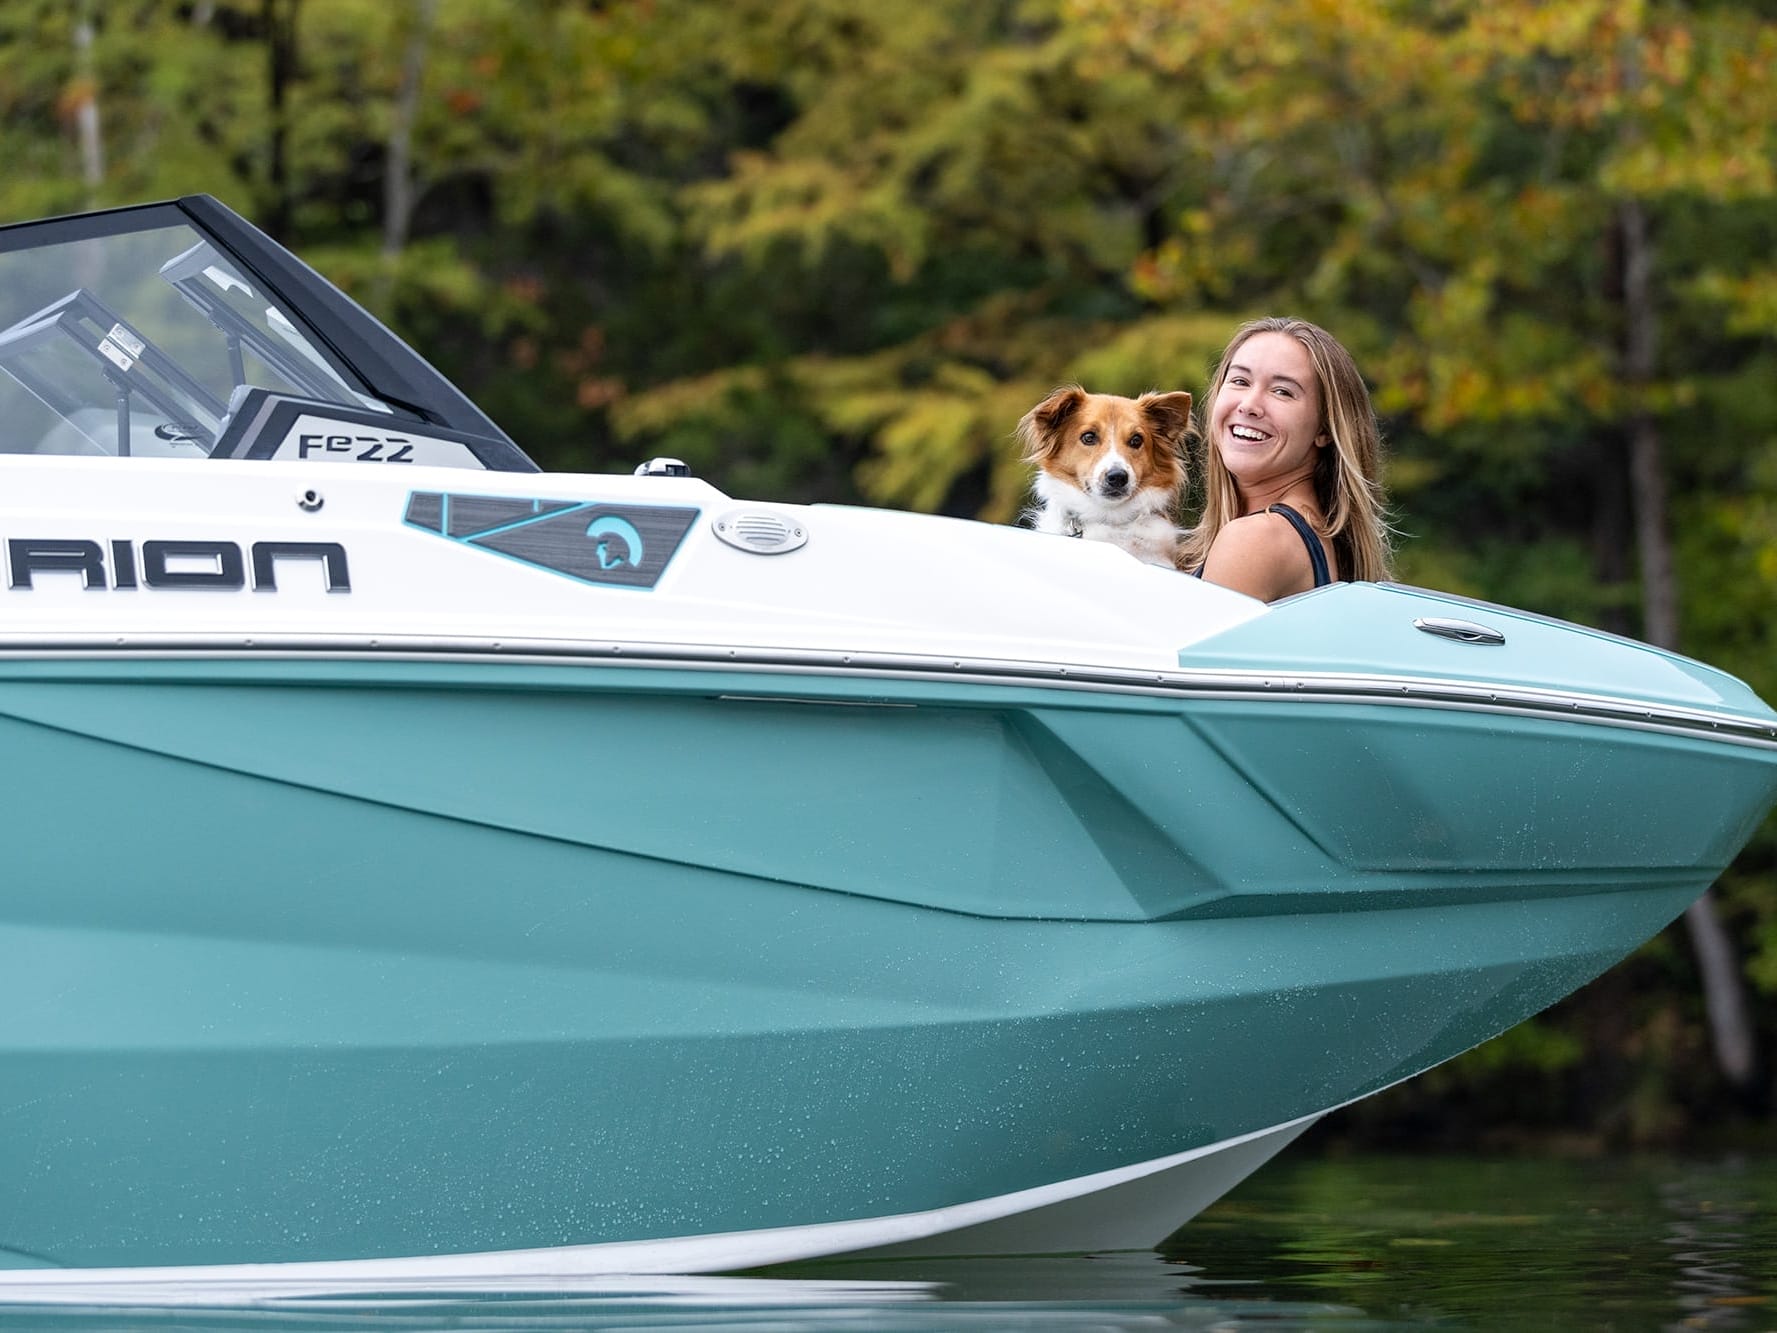 A woman, accompanied by her loyal dog, enjoys a serene moment on the back of a boat.